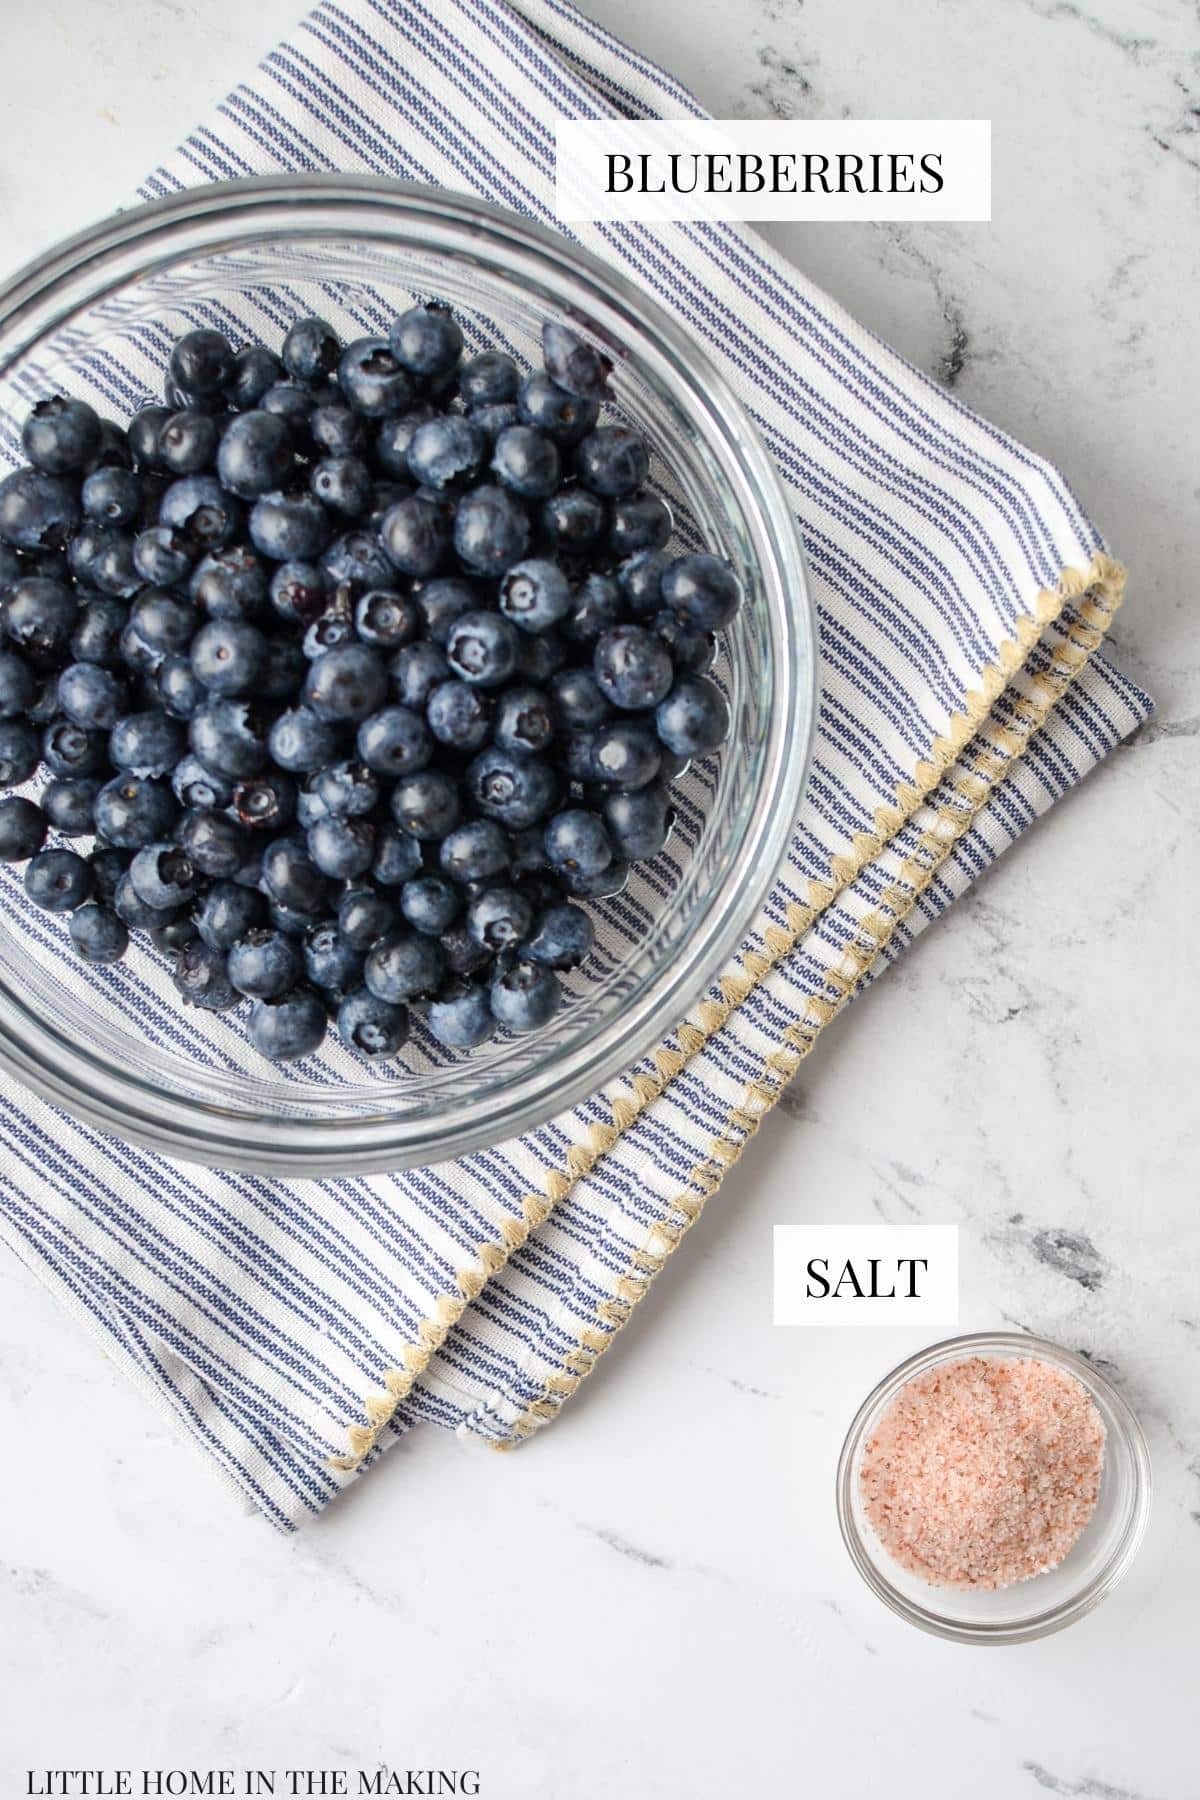 The ingredients needed to make fermented blueberries: fresh blueberries and salt.